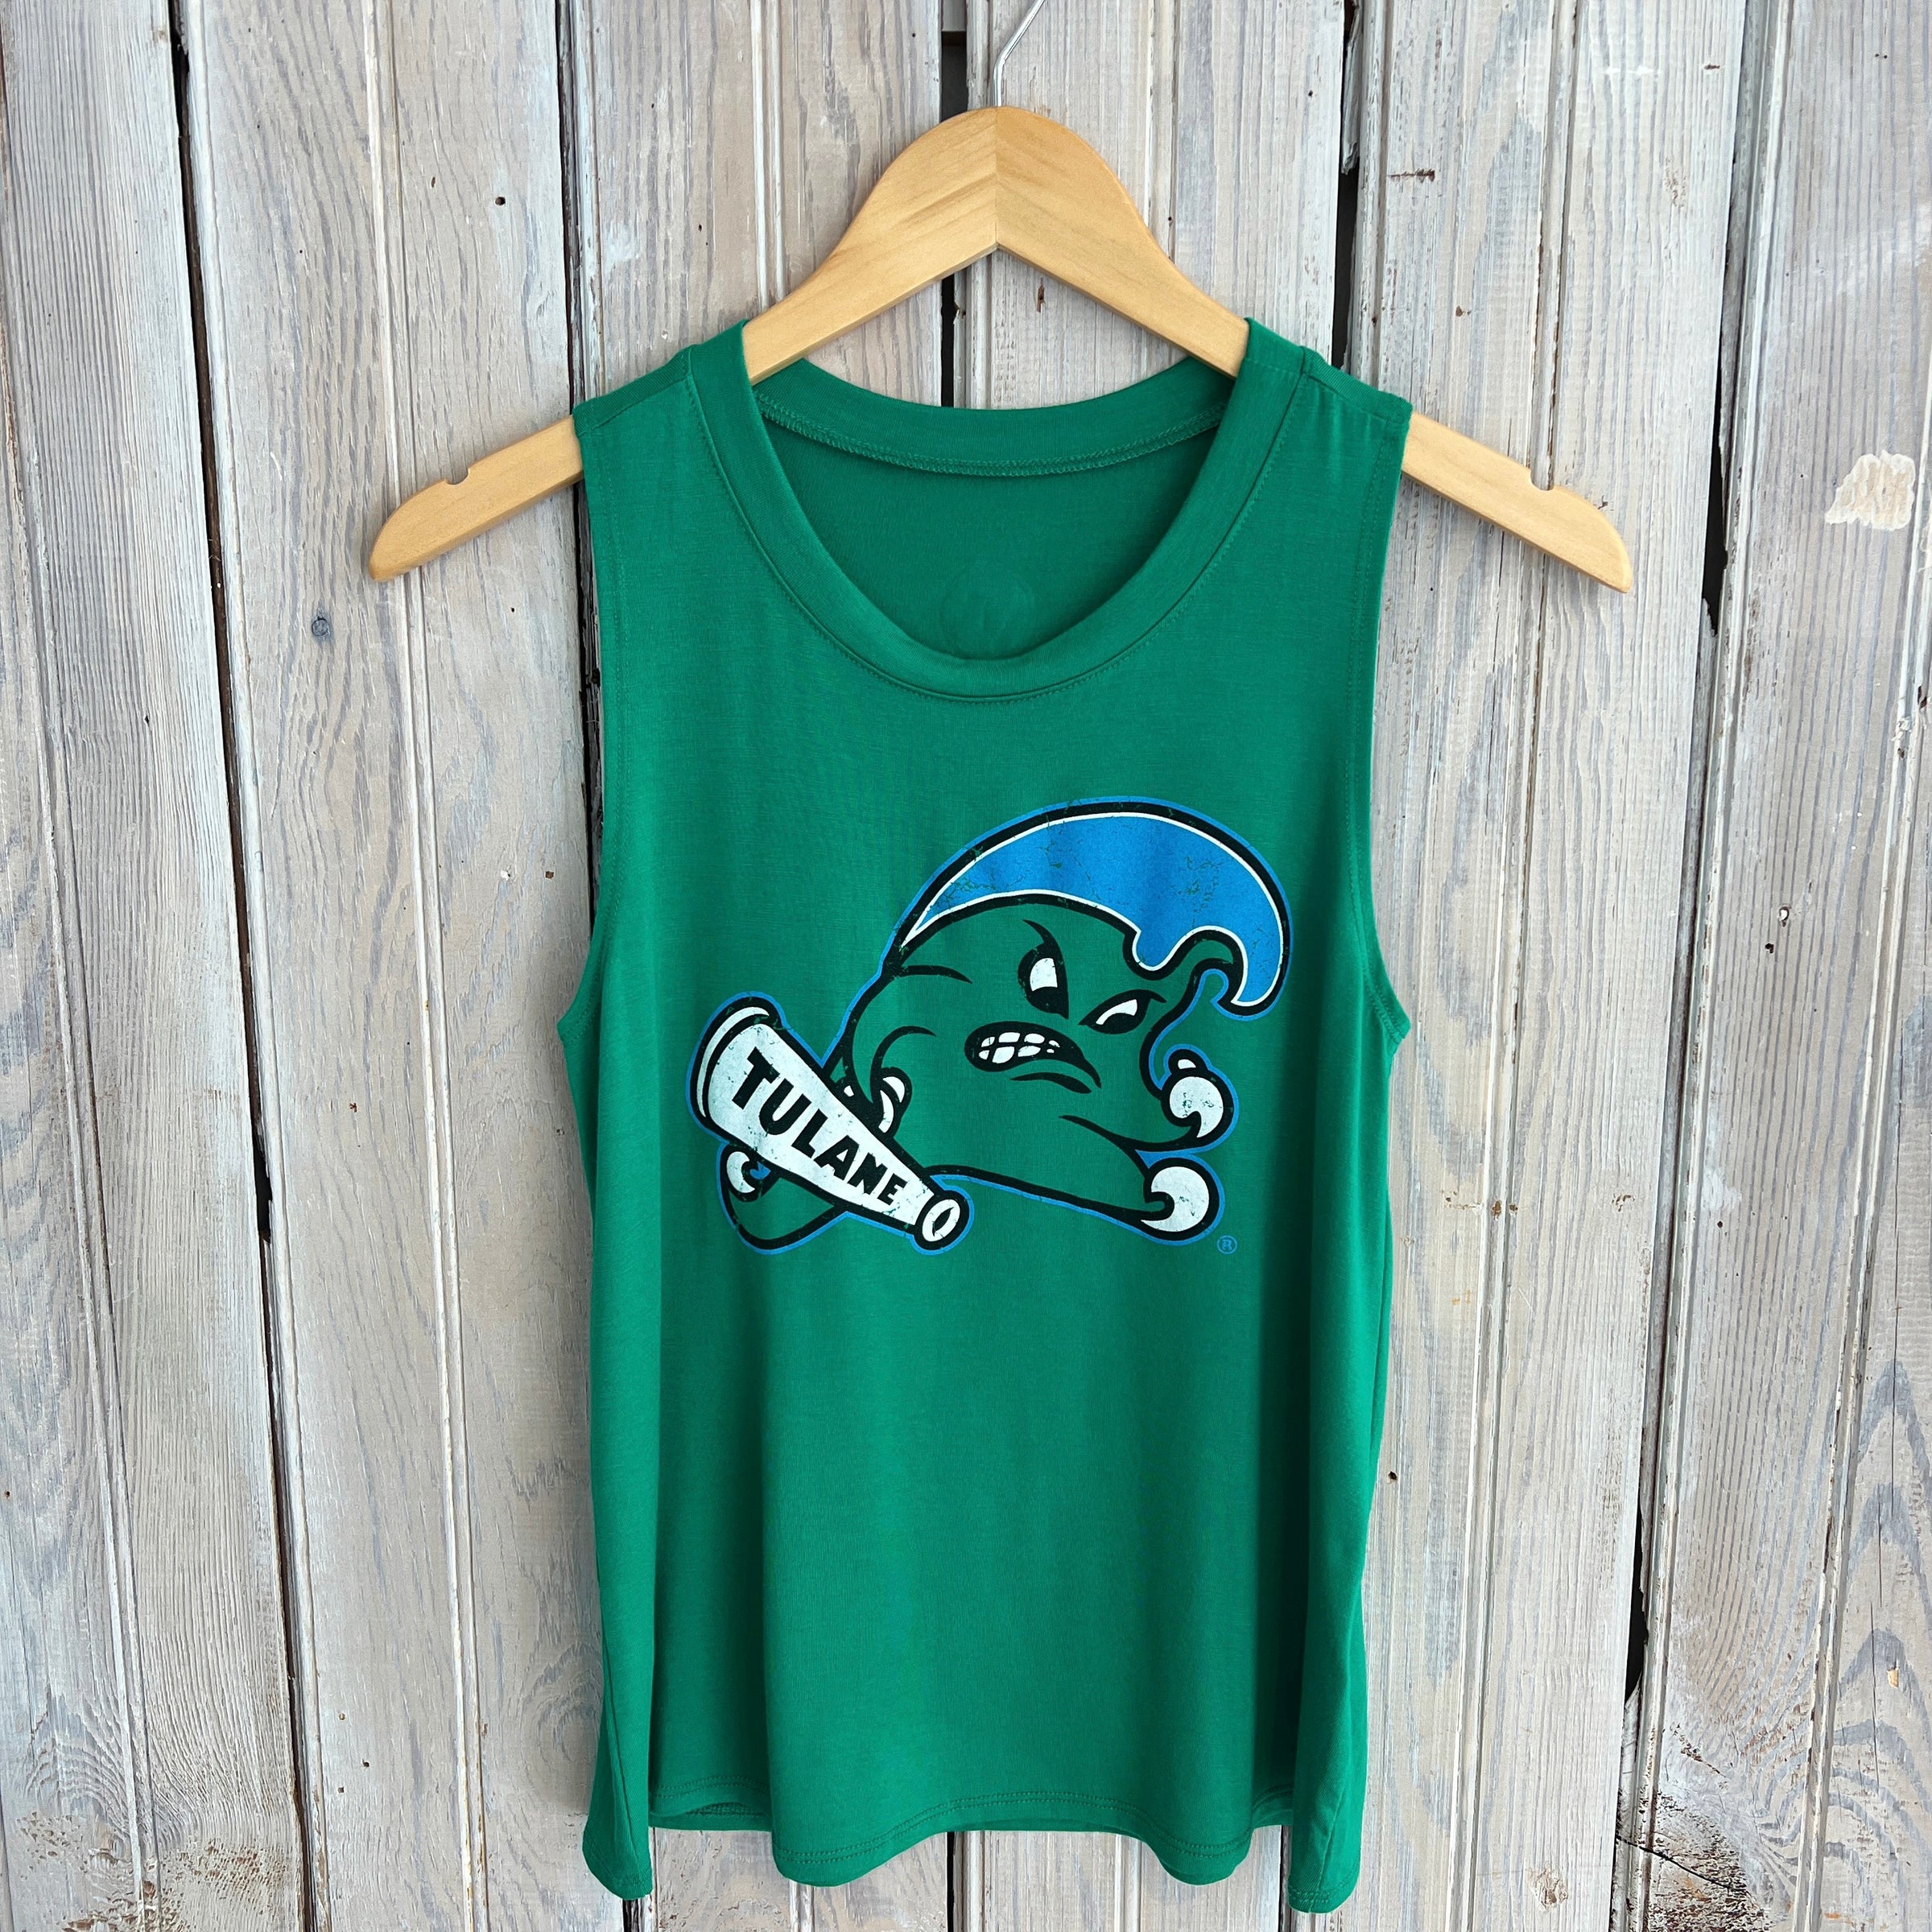 – Tulane x JT jeantherapy Angry Tank-green Wave